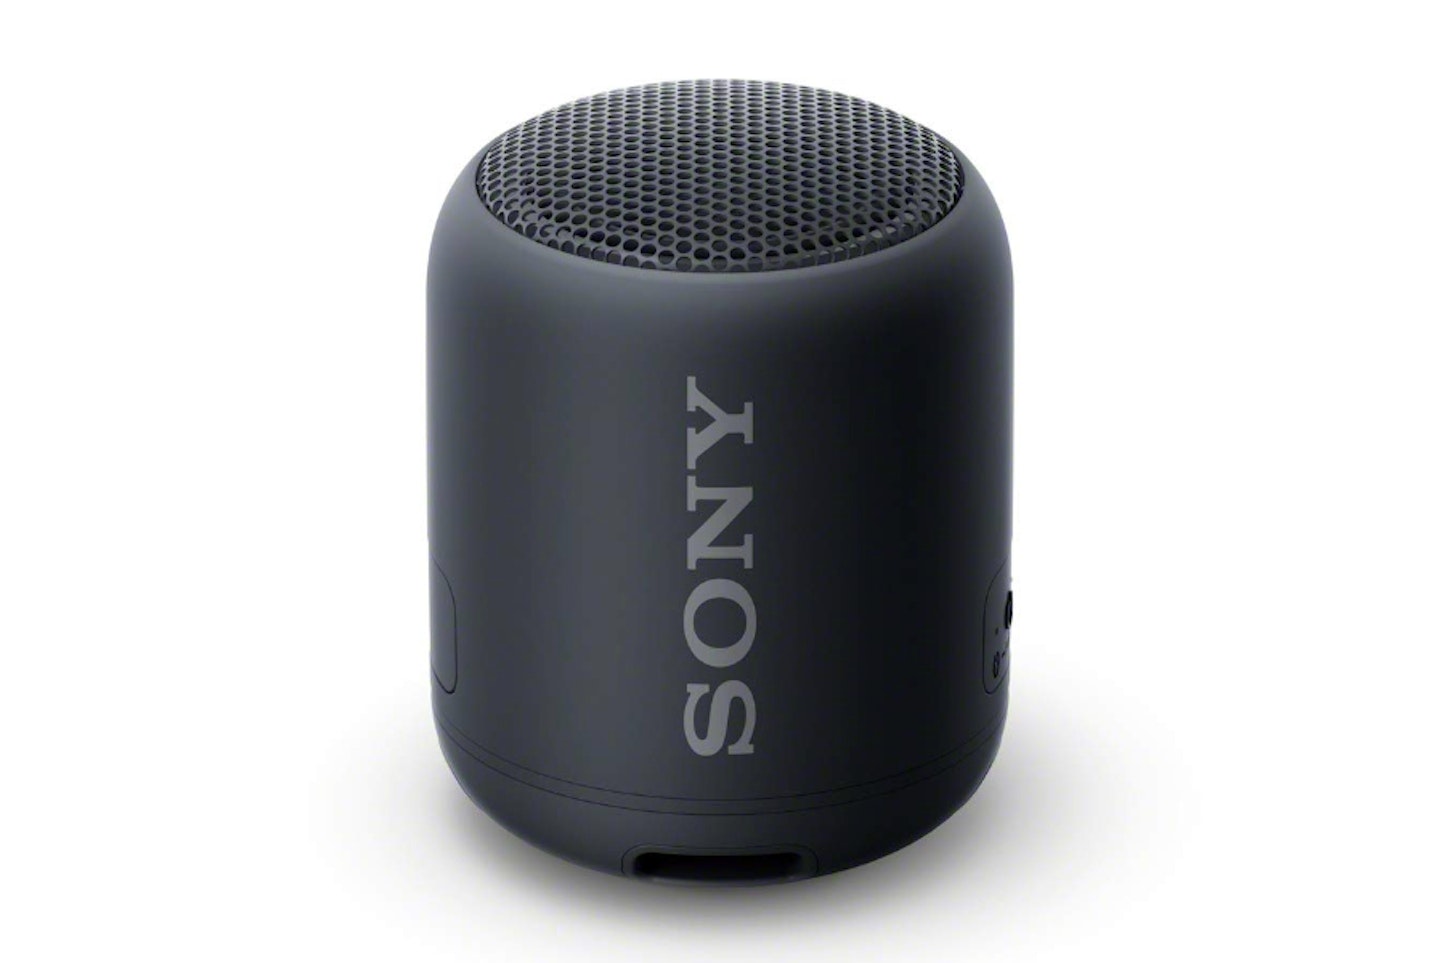 Sony SRS-XB12 Compact and Portable Waterproof Wireless Speaker with EXTRA BASS